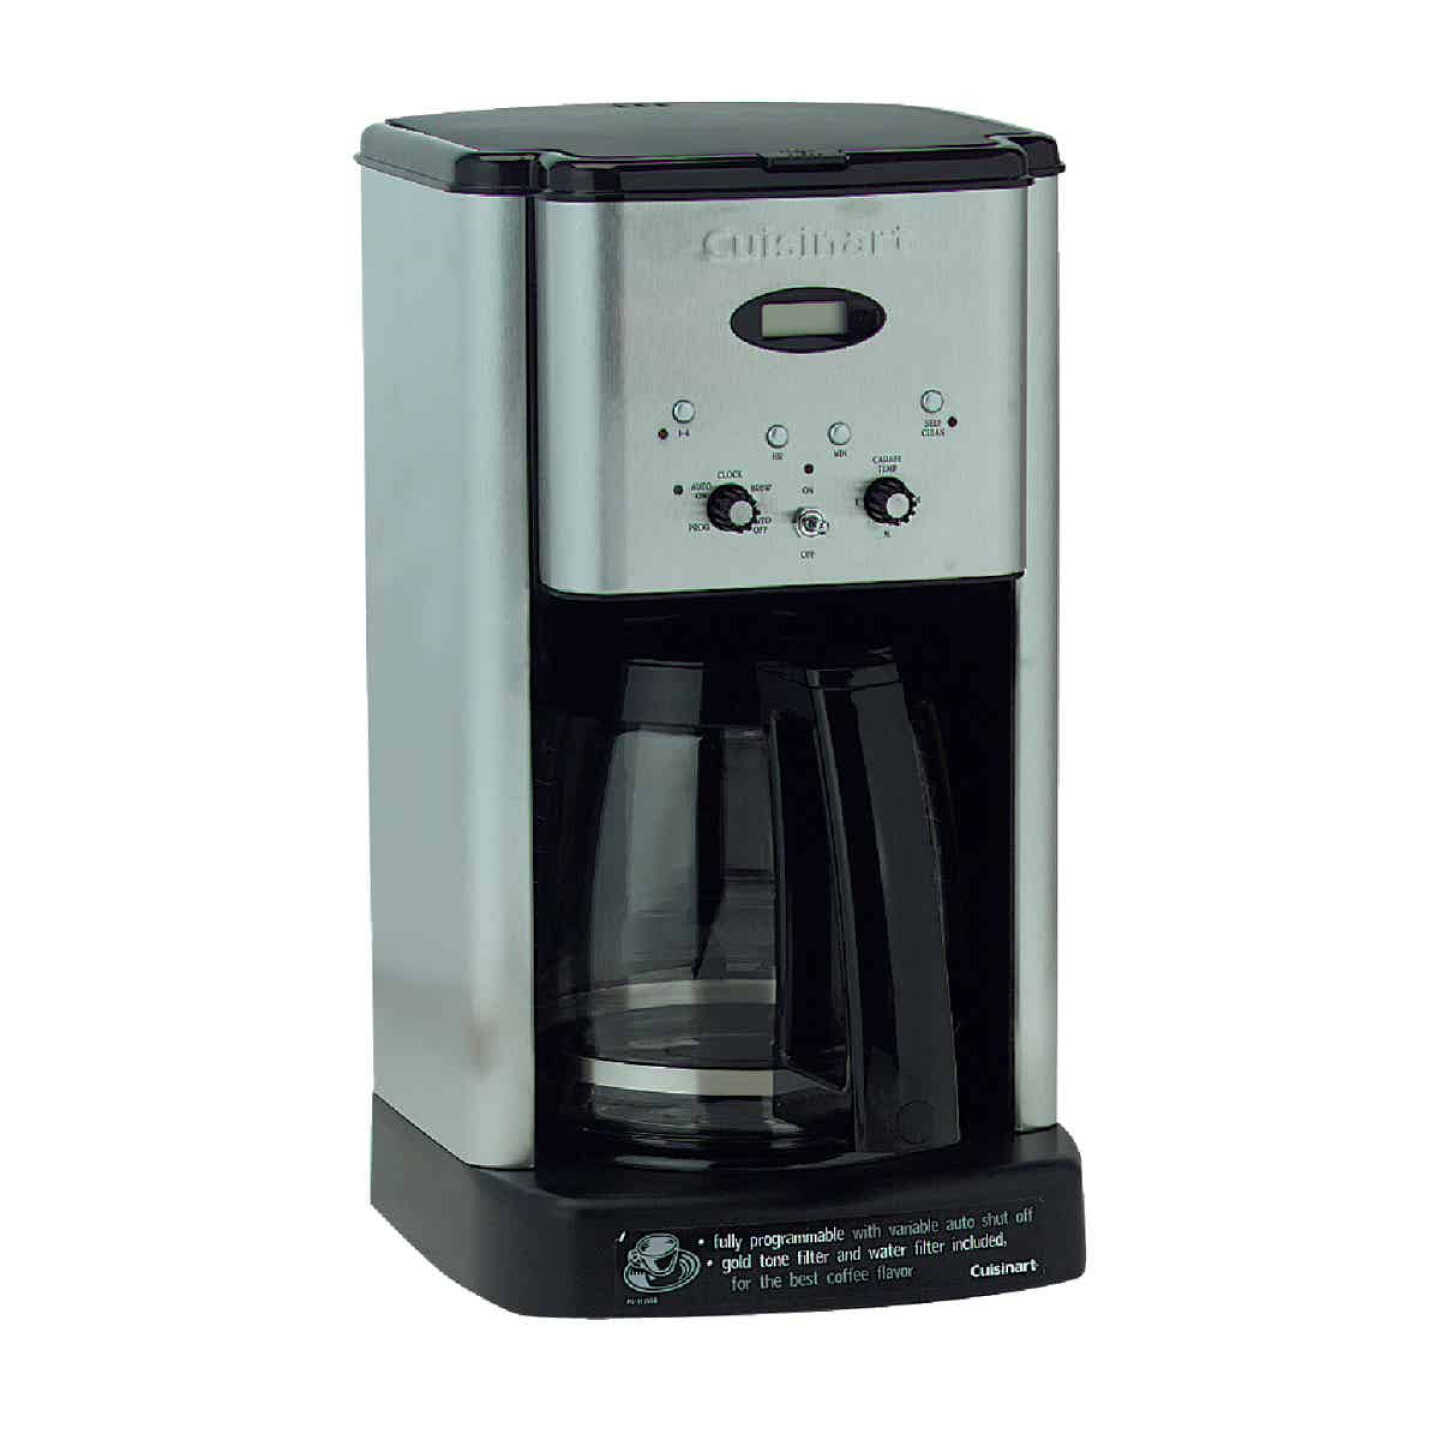 Cuisinart Coffee Center Stainless Steel 12-Cup Coffee Maker and